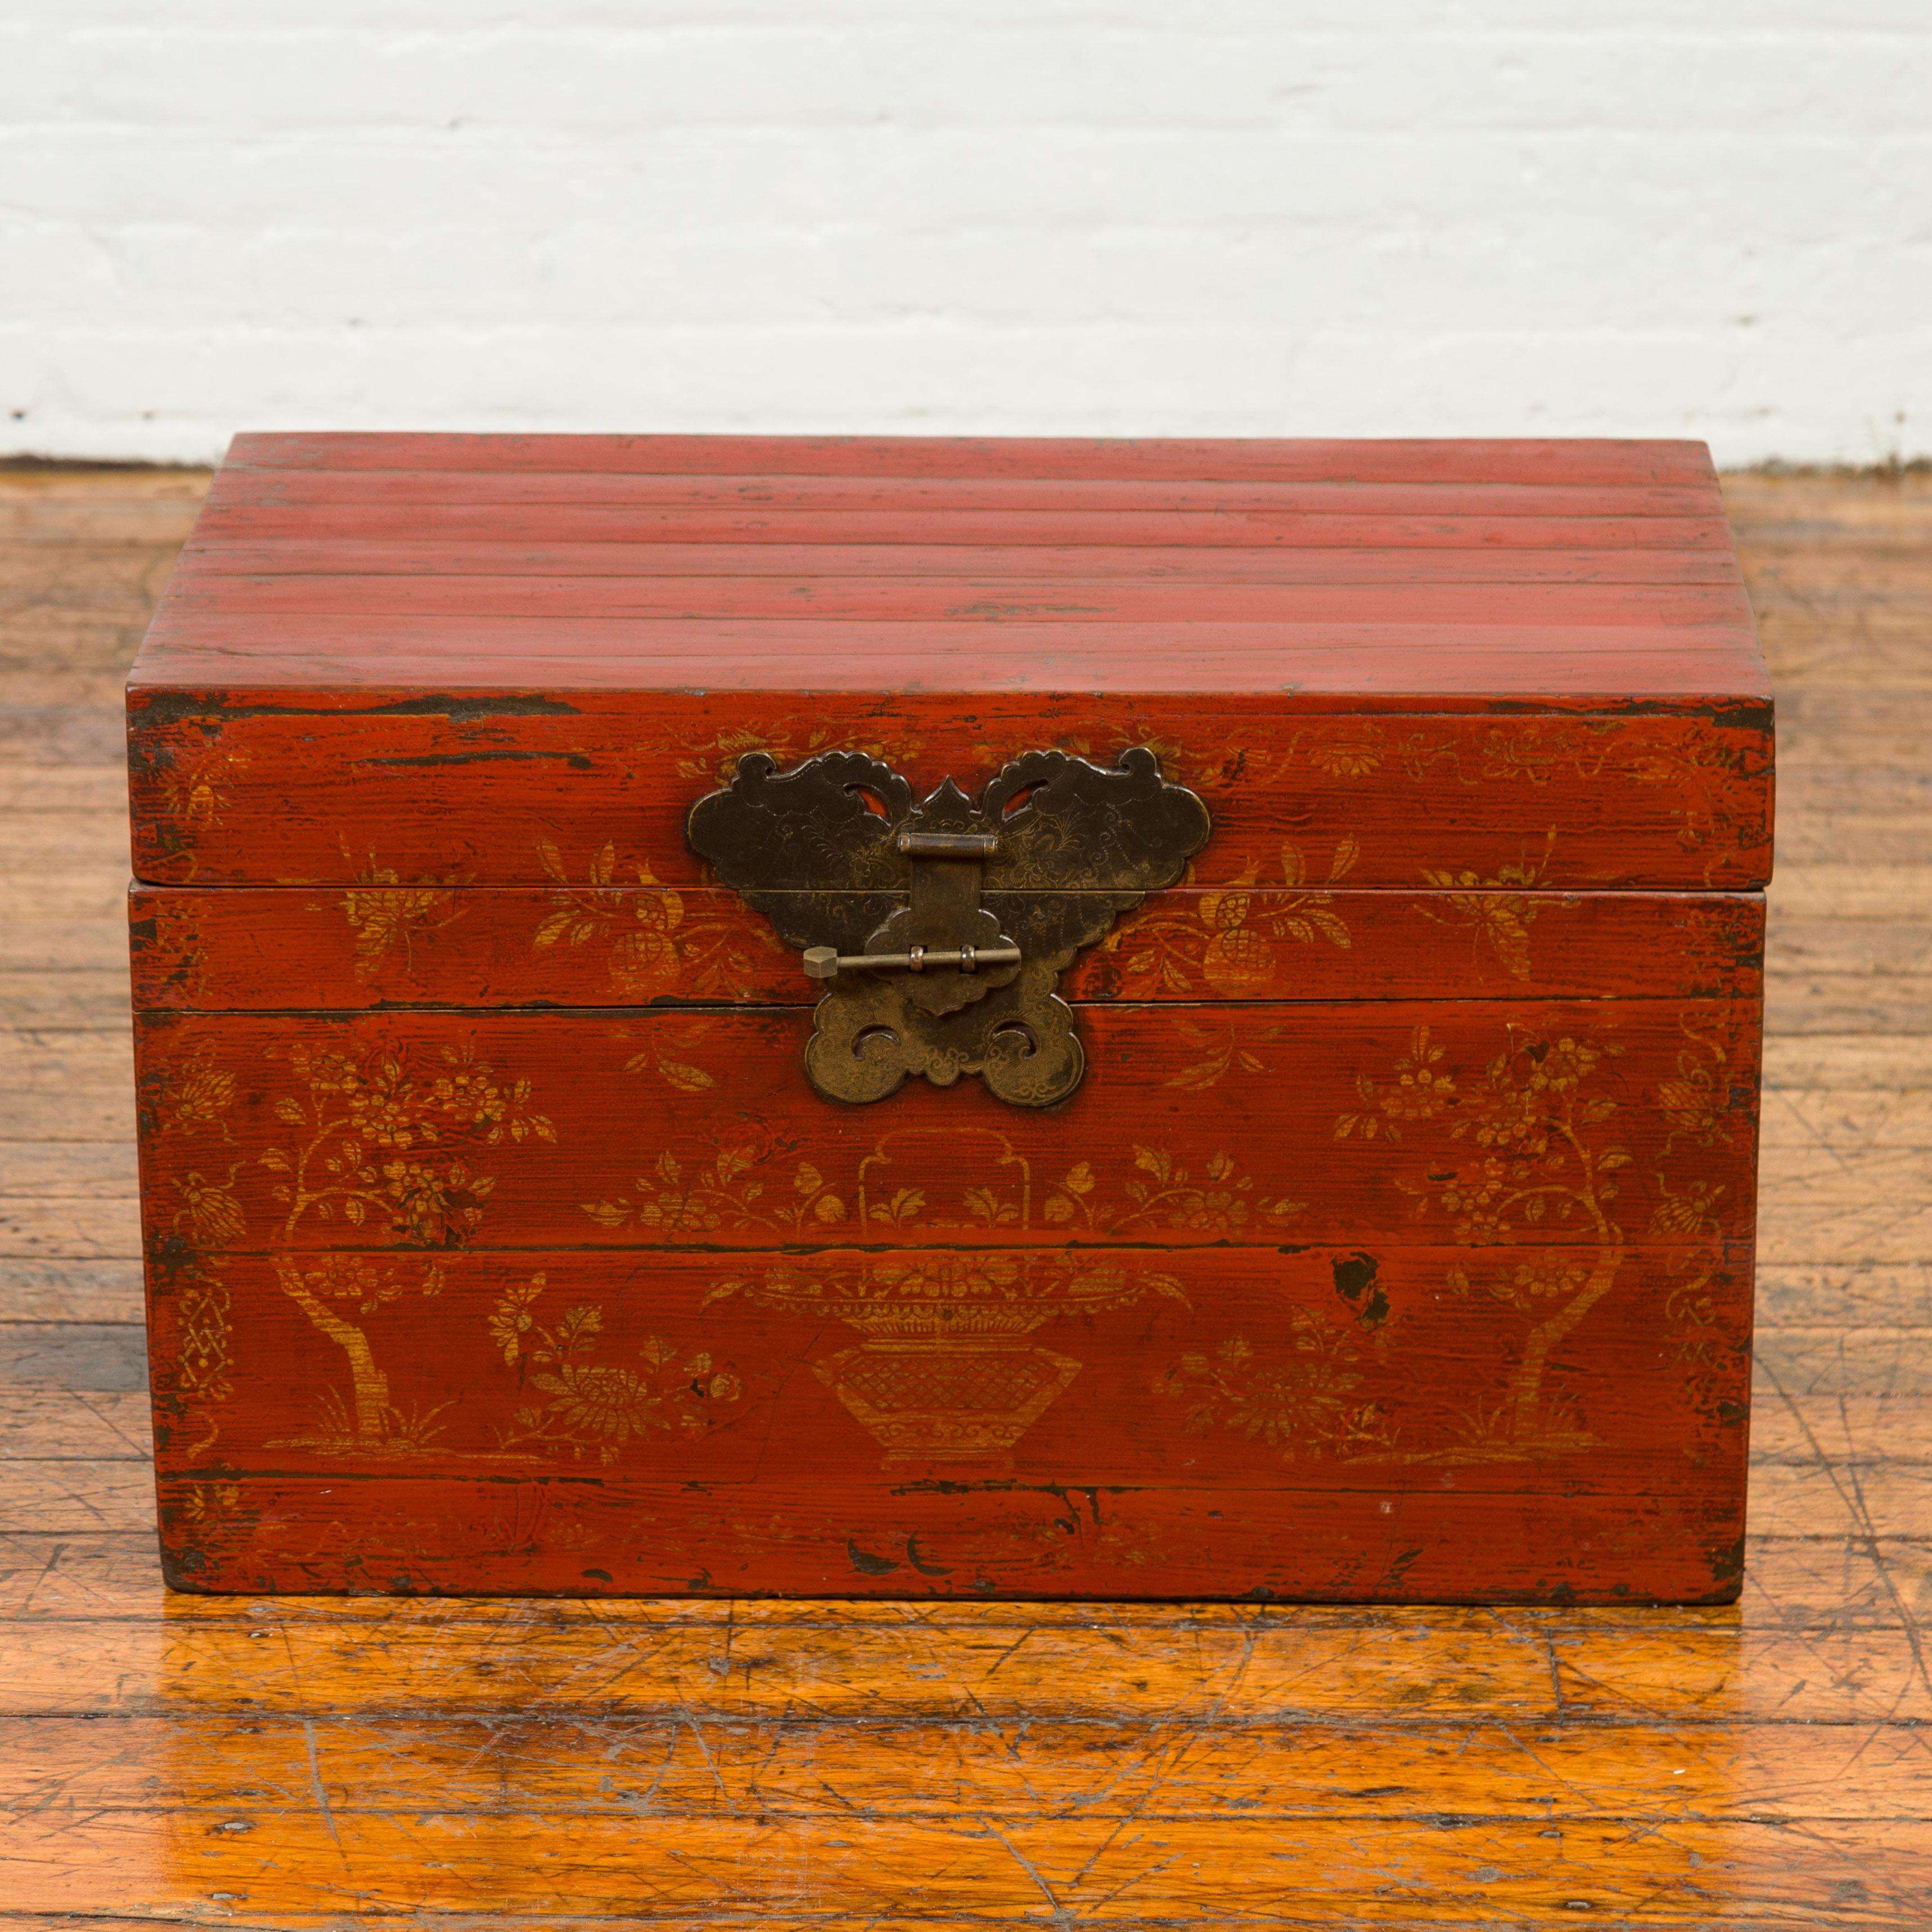 A Chinese Qing red lacquered wooden blanket chest from the 19th century, with floral décor and butterfly brass hardware. Born in China during the Qing Dynasty, this red lacquered blanket chest features a rectangular lid accented with an exquisite